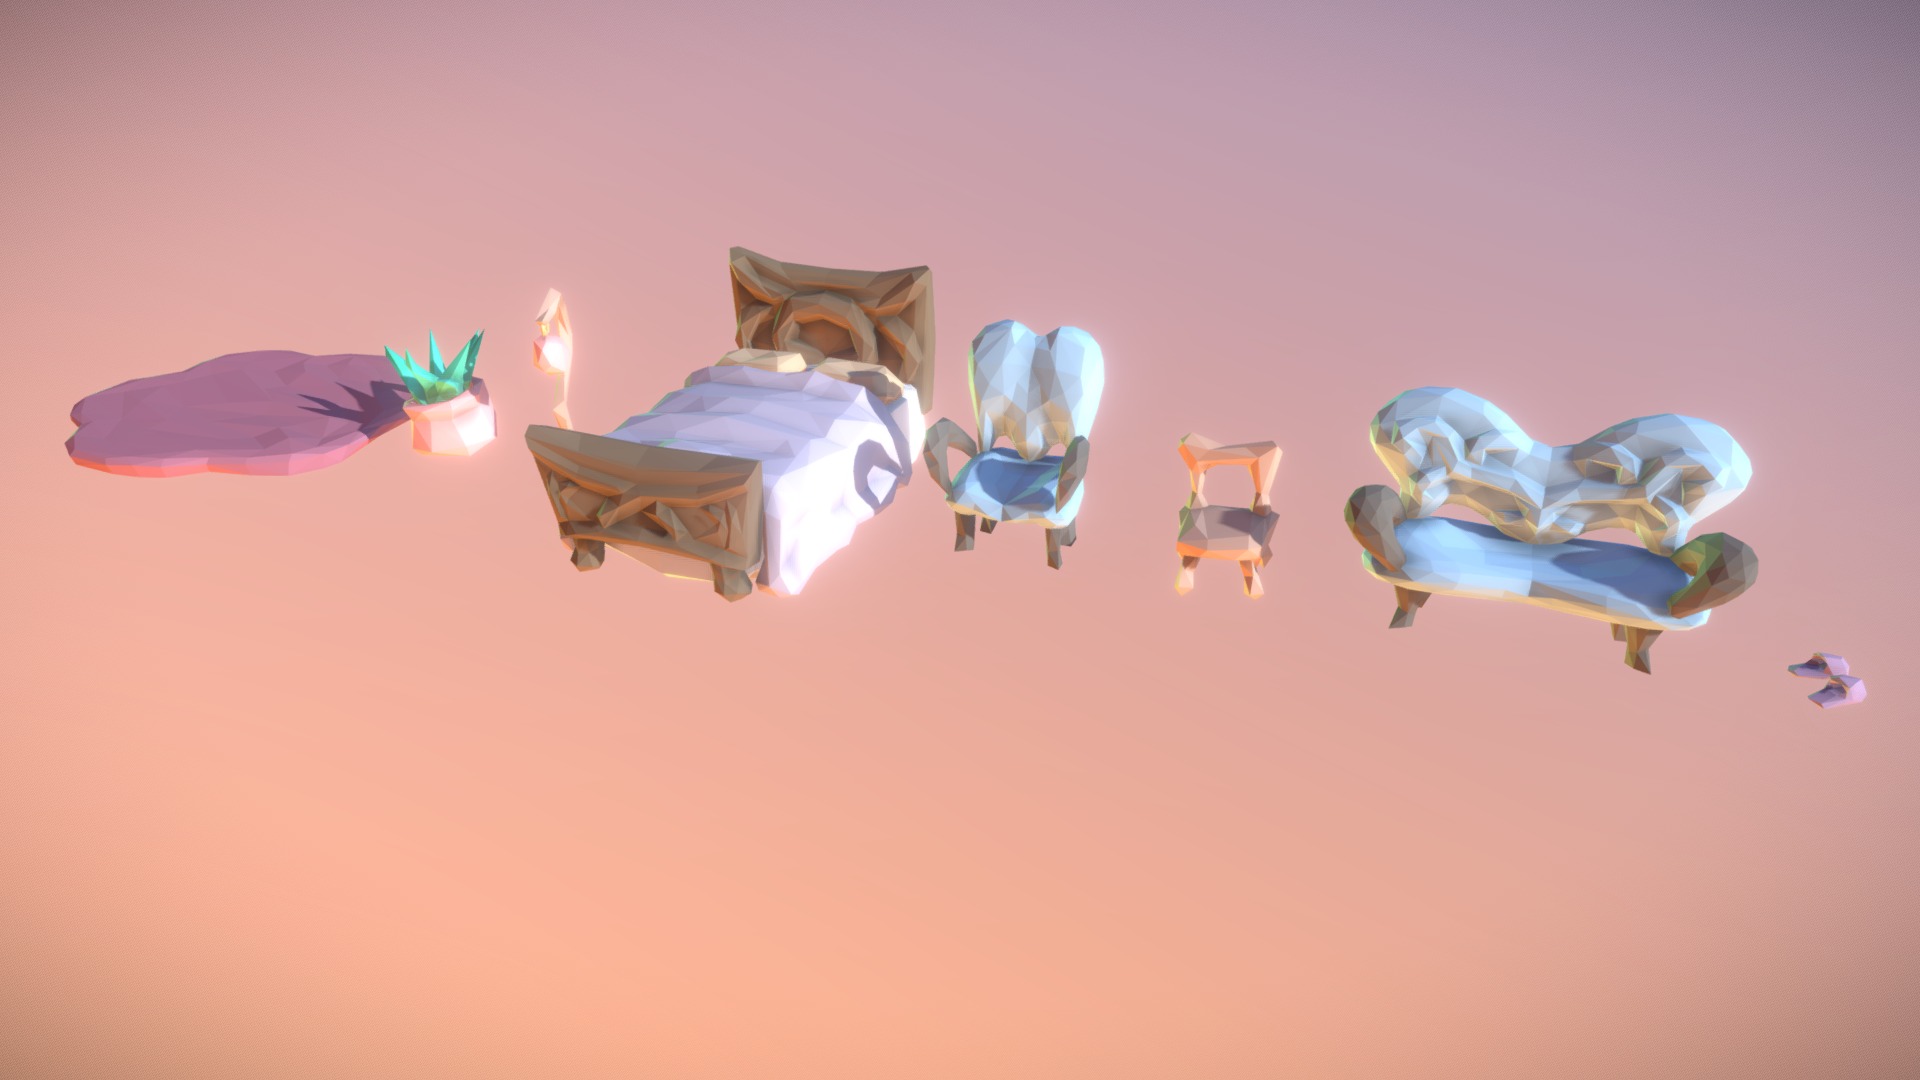 3D model Low Poly Furniture Set - This is a 3D model of the Low Poly Furniture Set. The 3D model is about a group of fish swimming in the water.